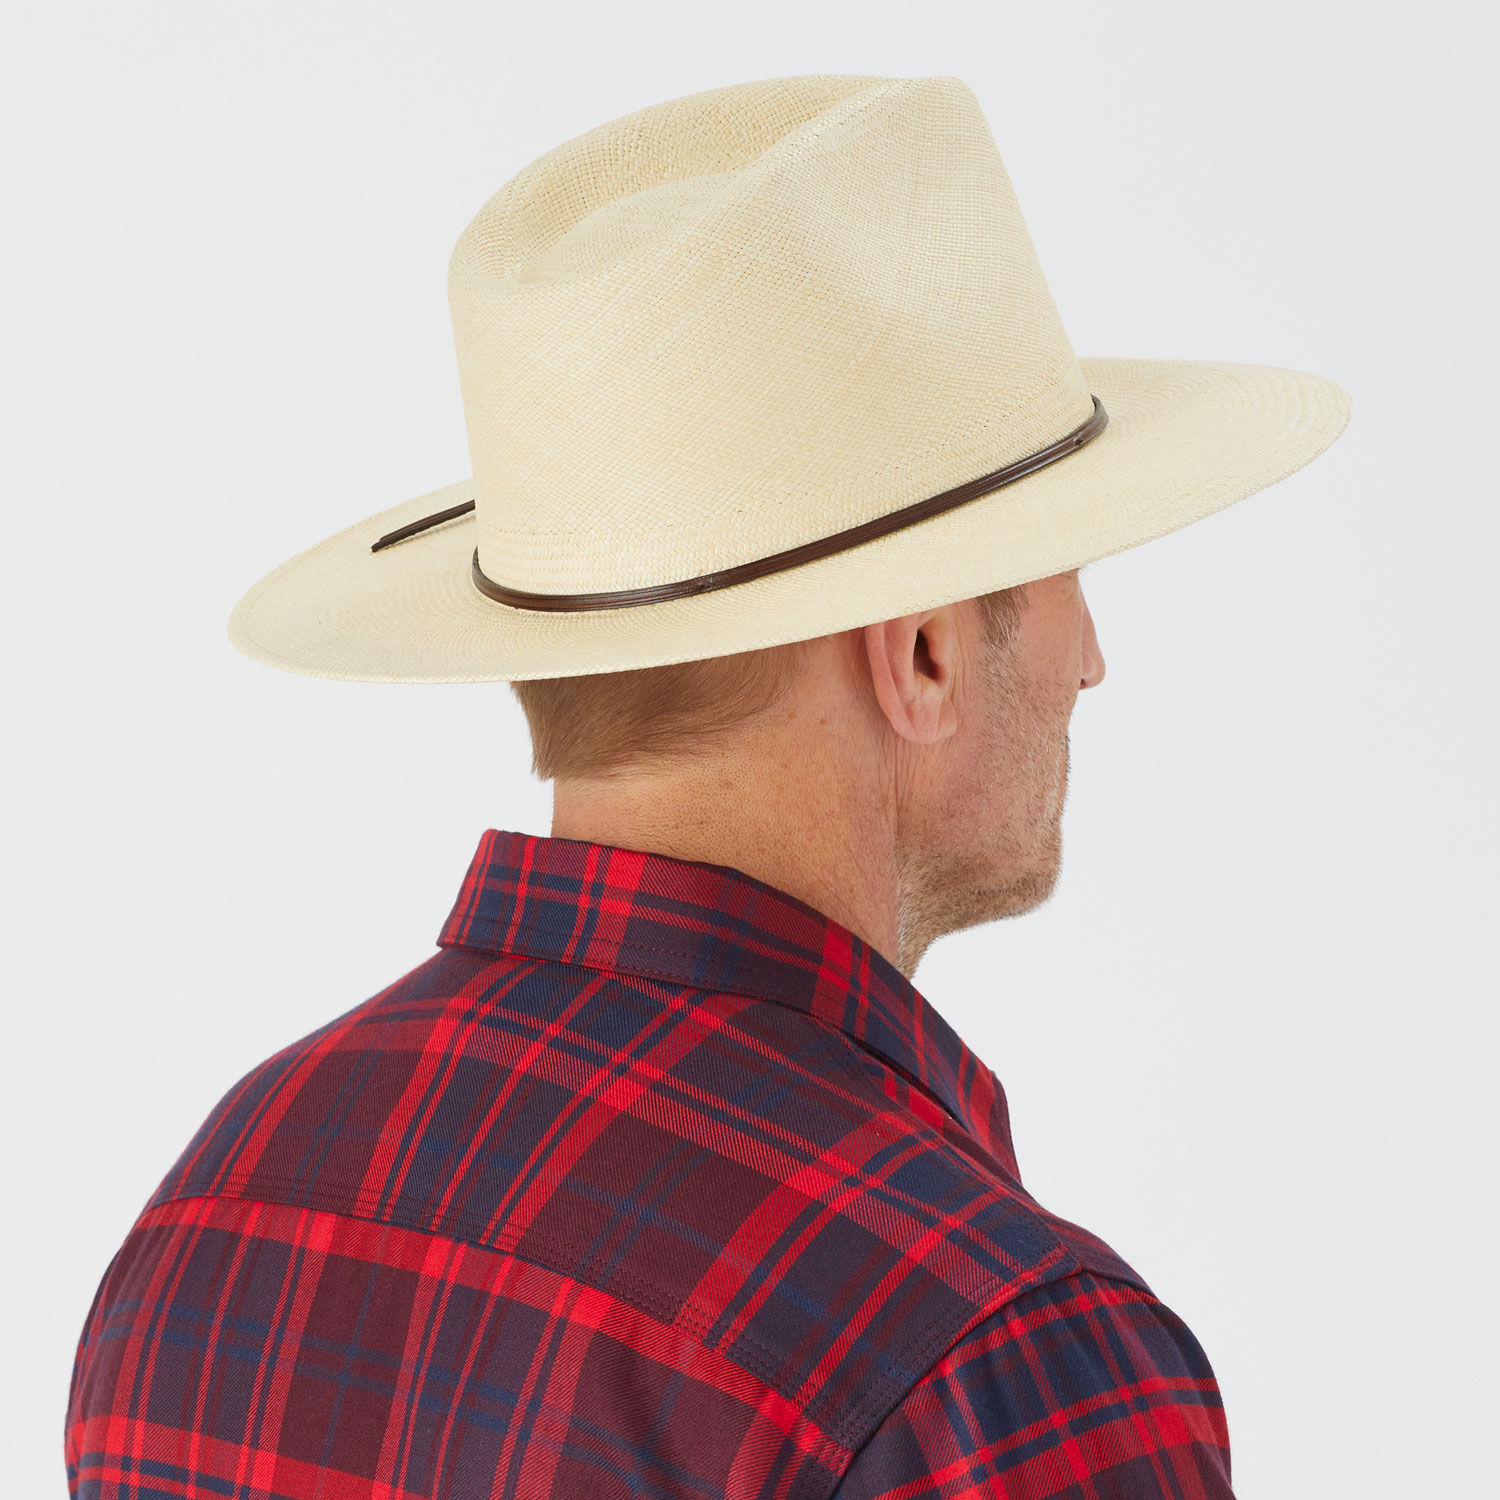 Best Made Steson Panama Hat | Duluth Trading Company